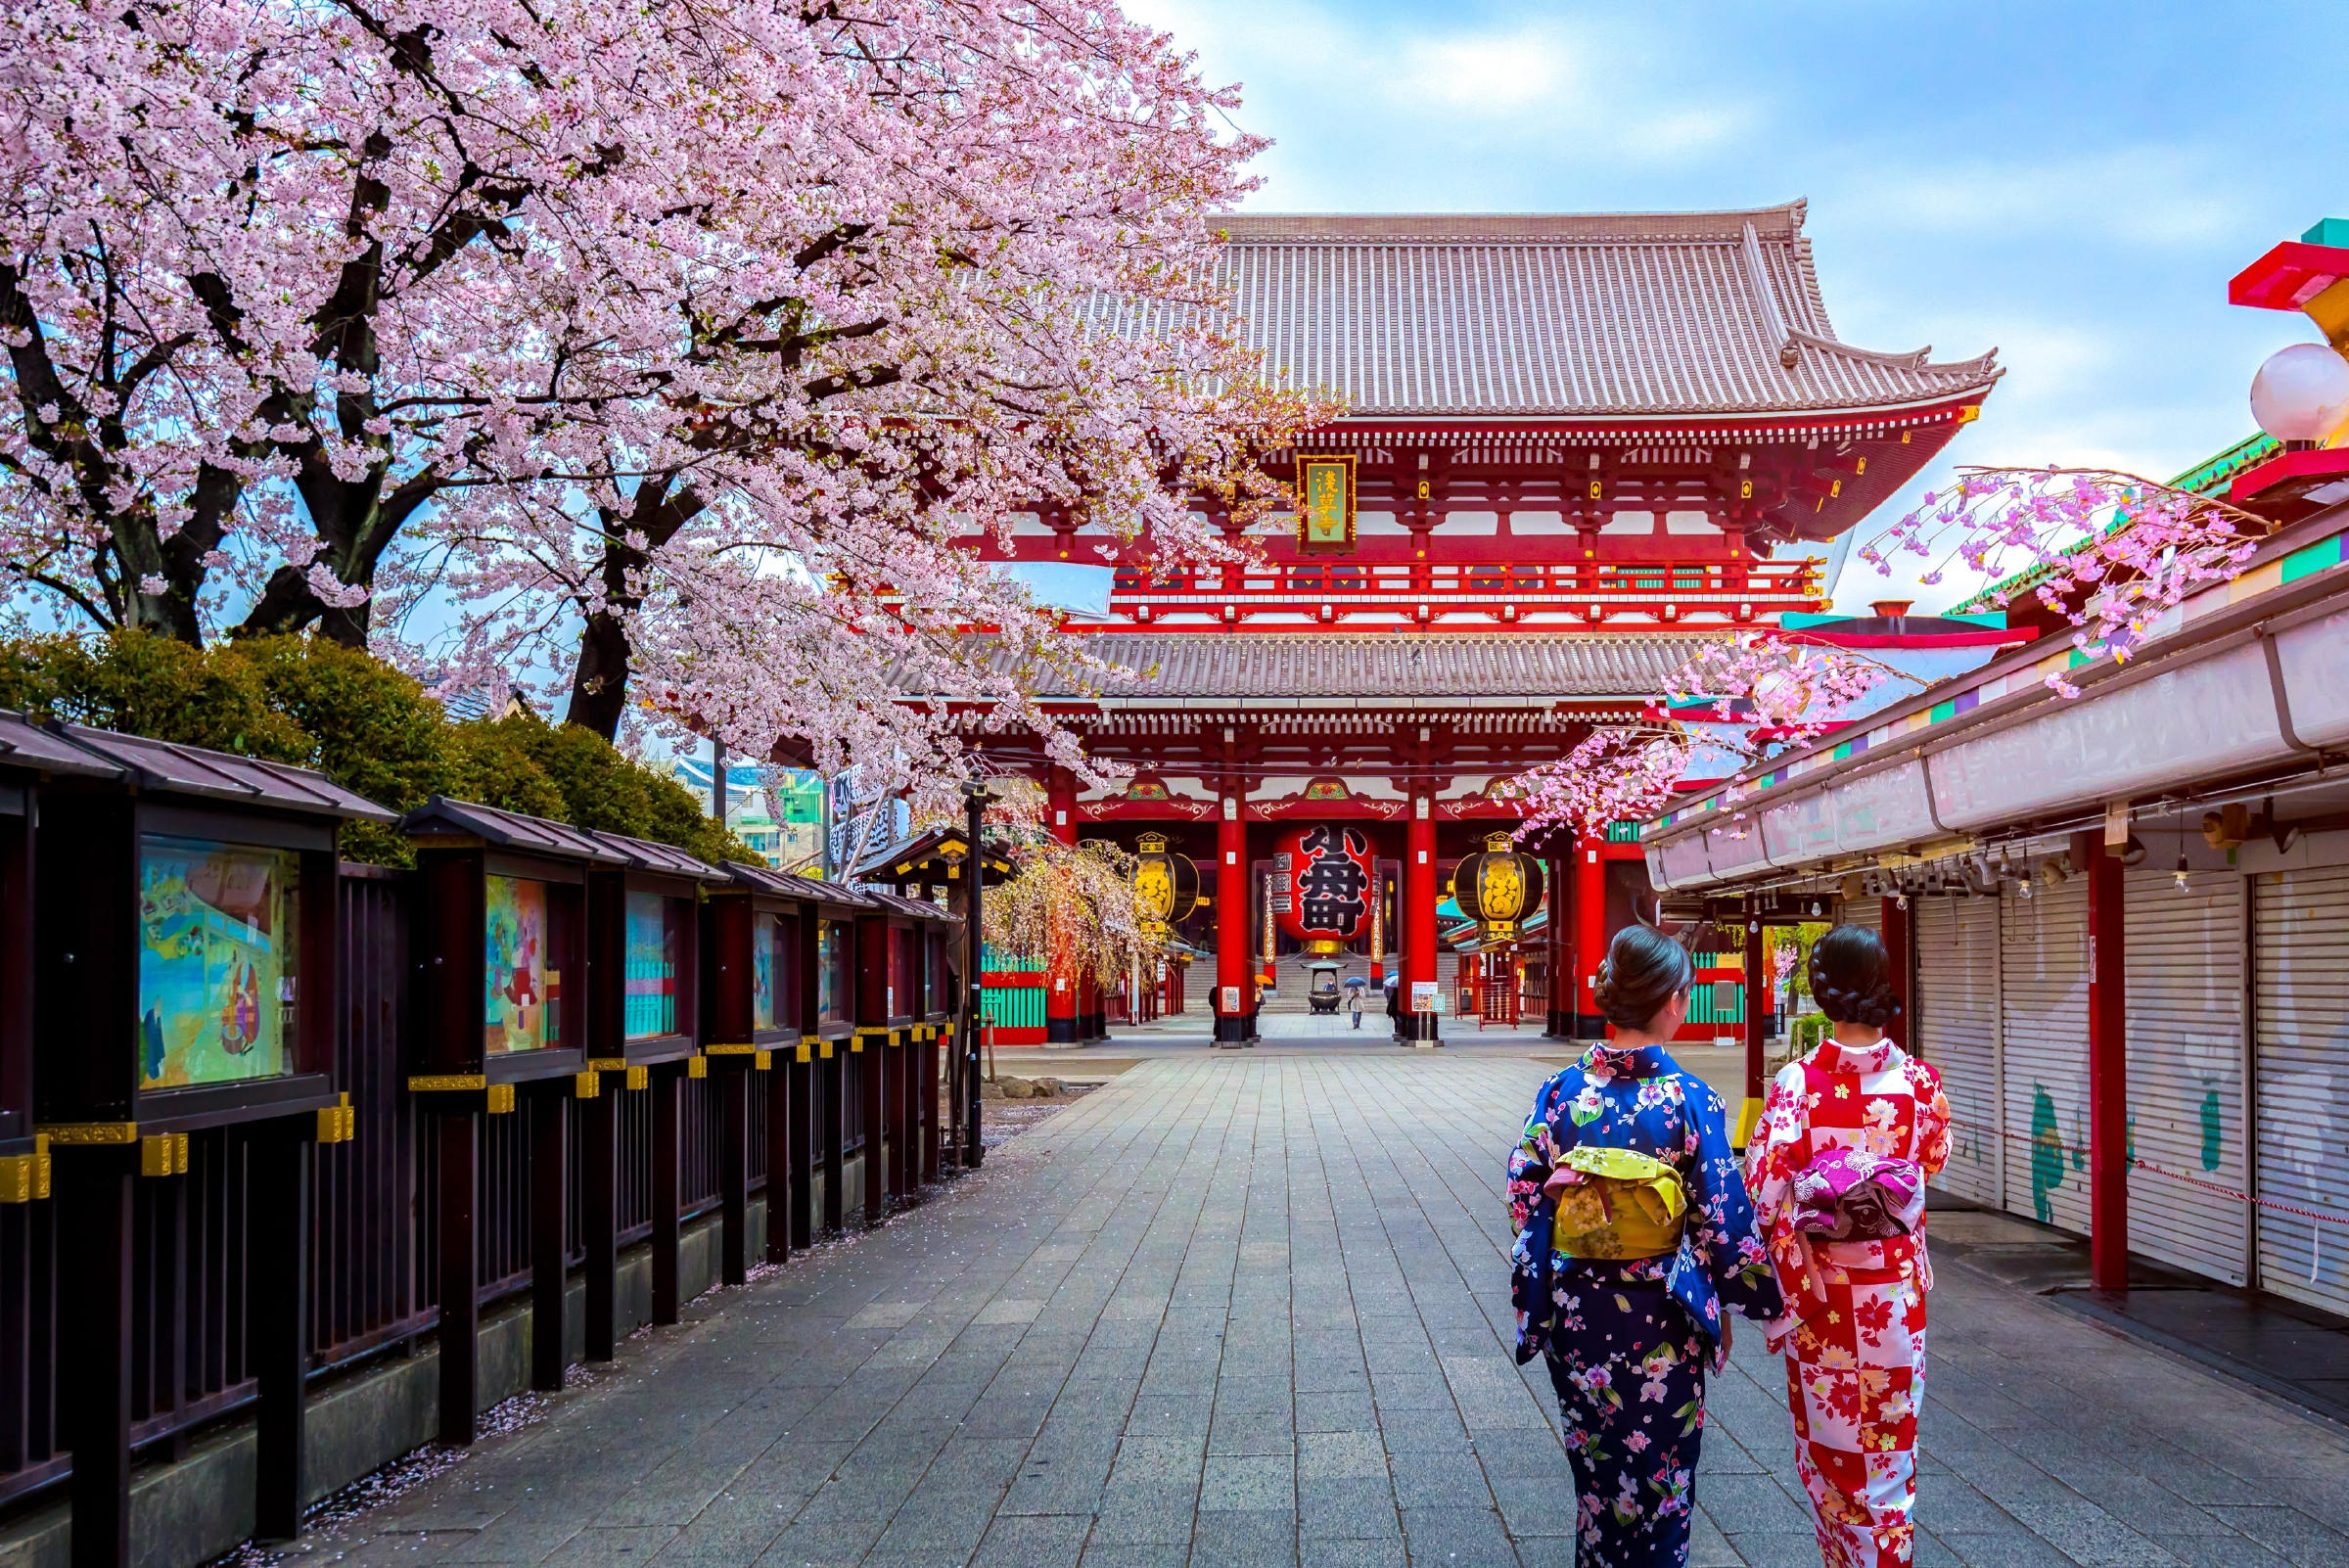 Went To Japan During Sakura Season But Didn't See Any? Here's How You